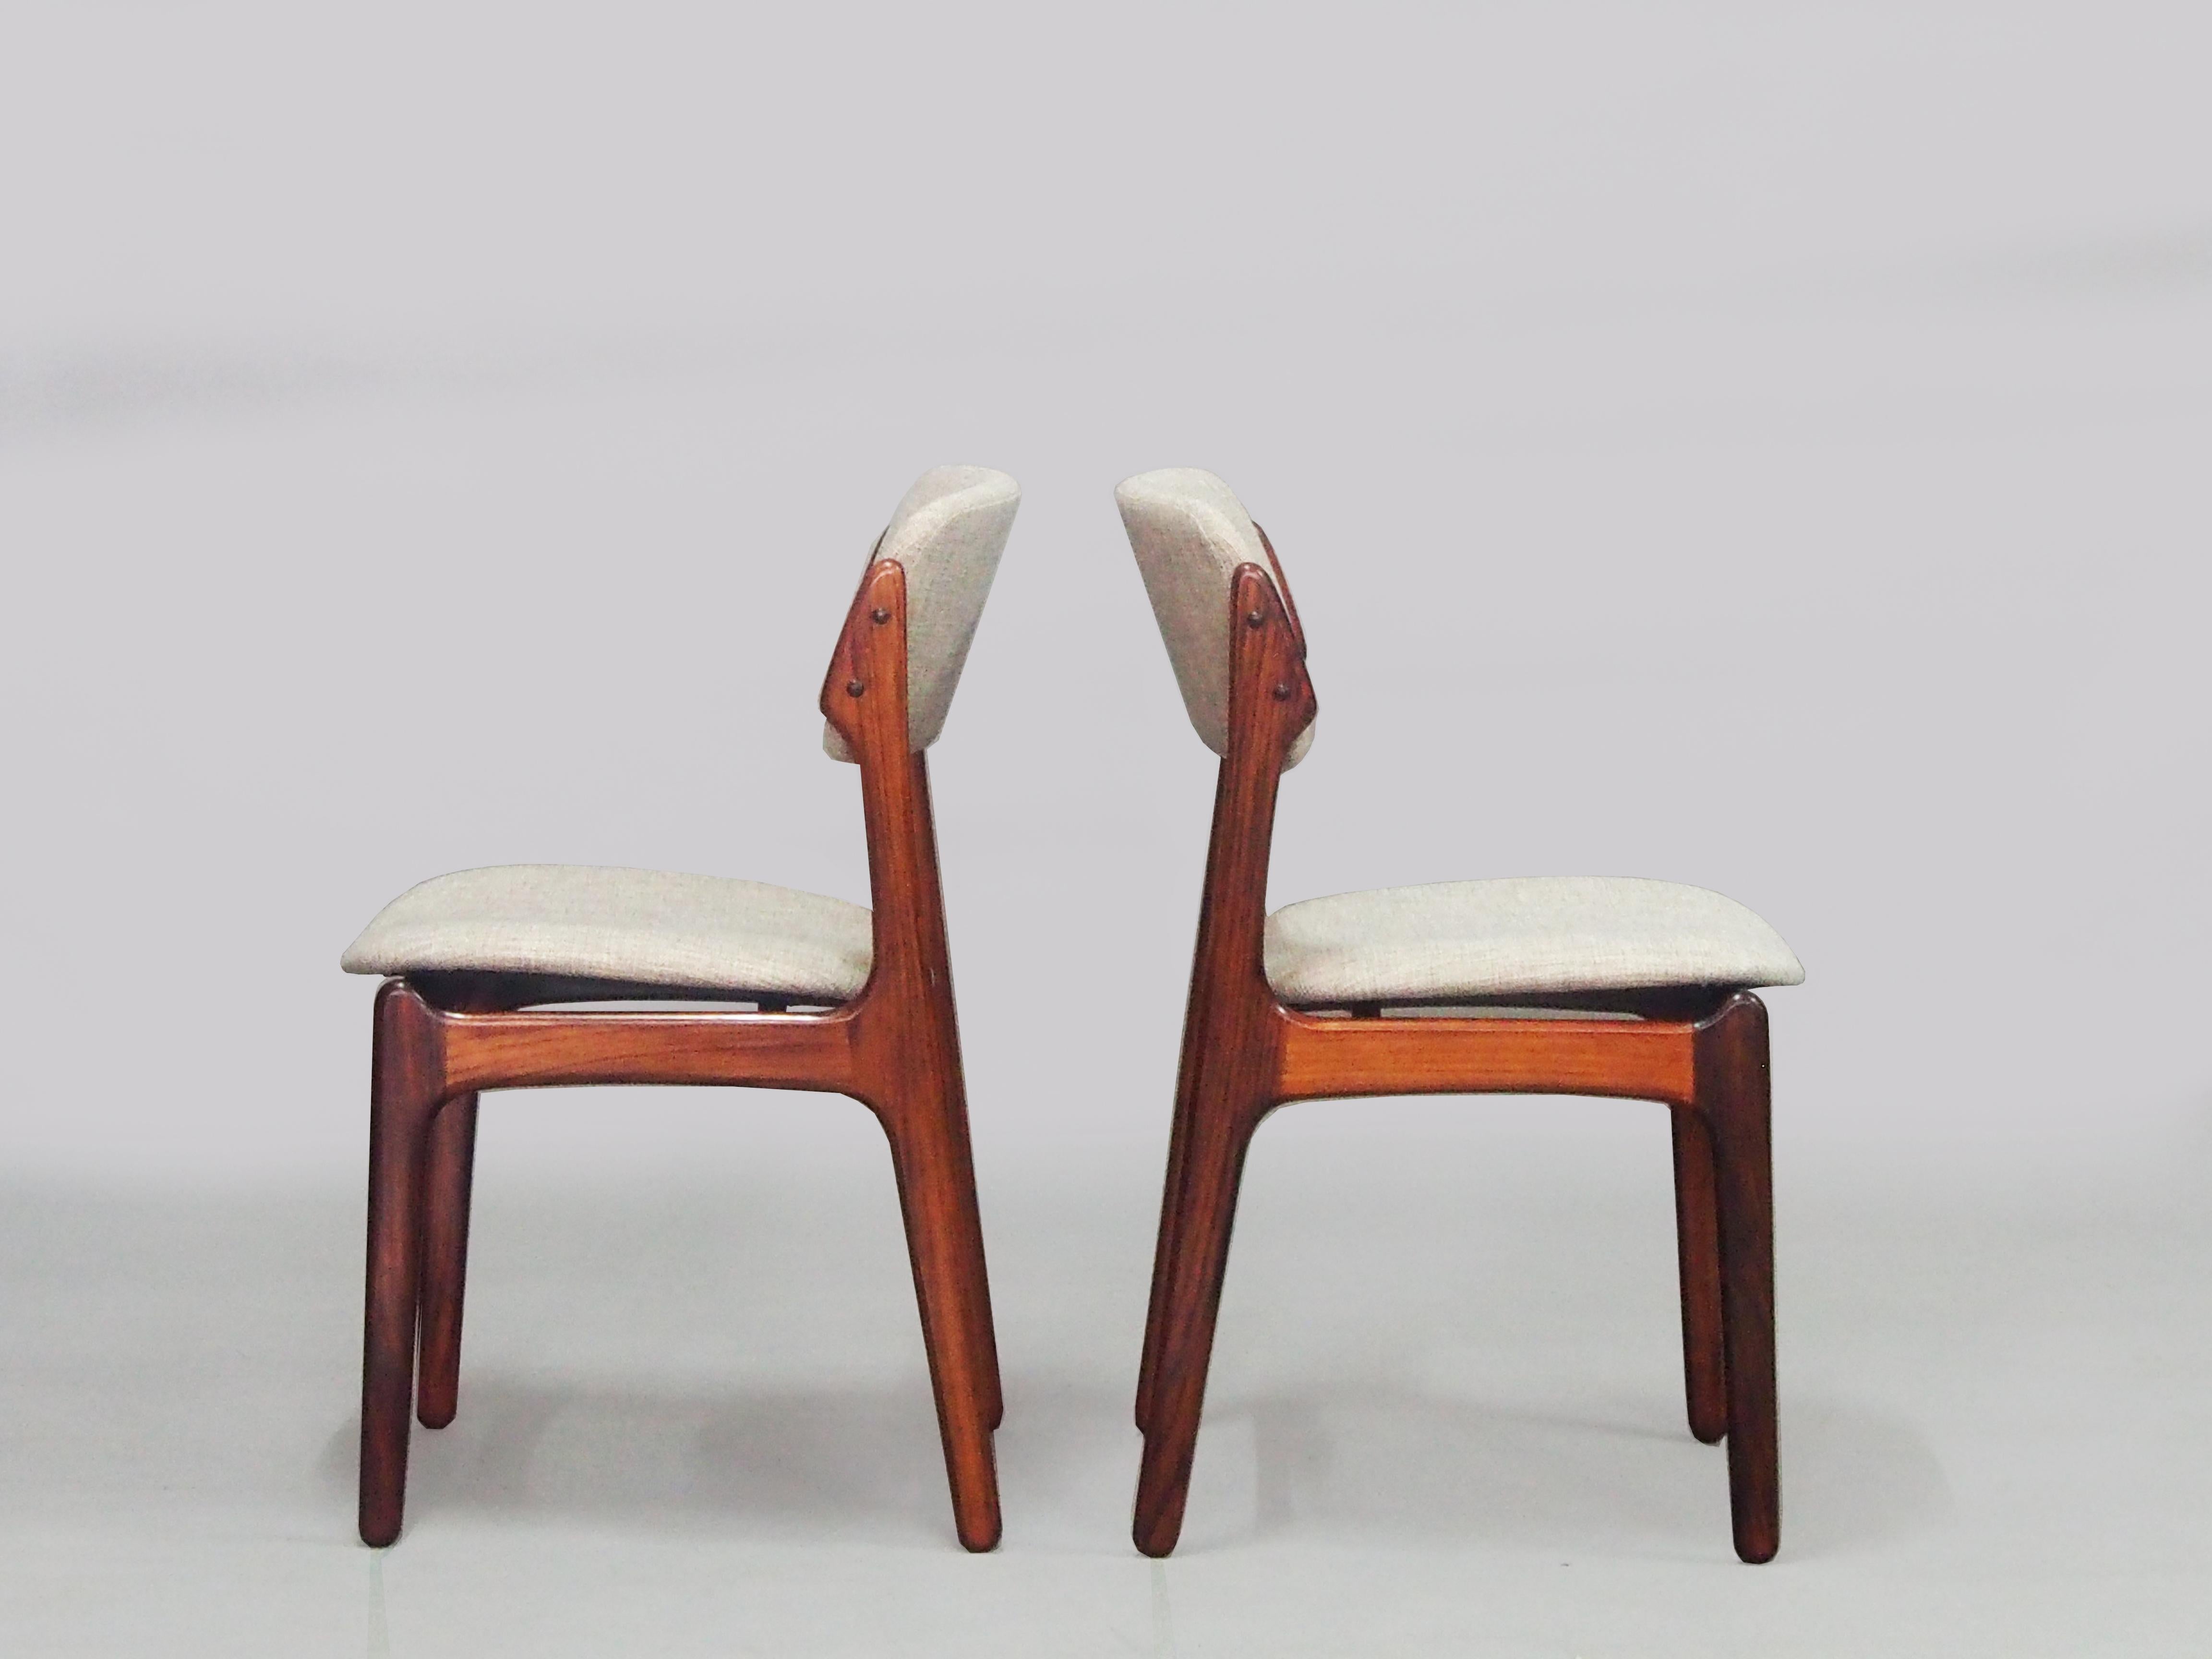 Set of four dining chairs model 49 in rosewood with floating seat designed by Erik Buch for Oddense Maskinsnedkeri in Denmark, 1960s
Fully restored, hand-made varnish by our own team of craftsmen.
   